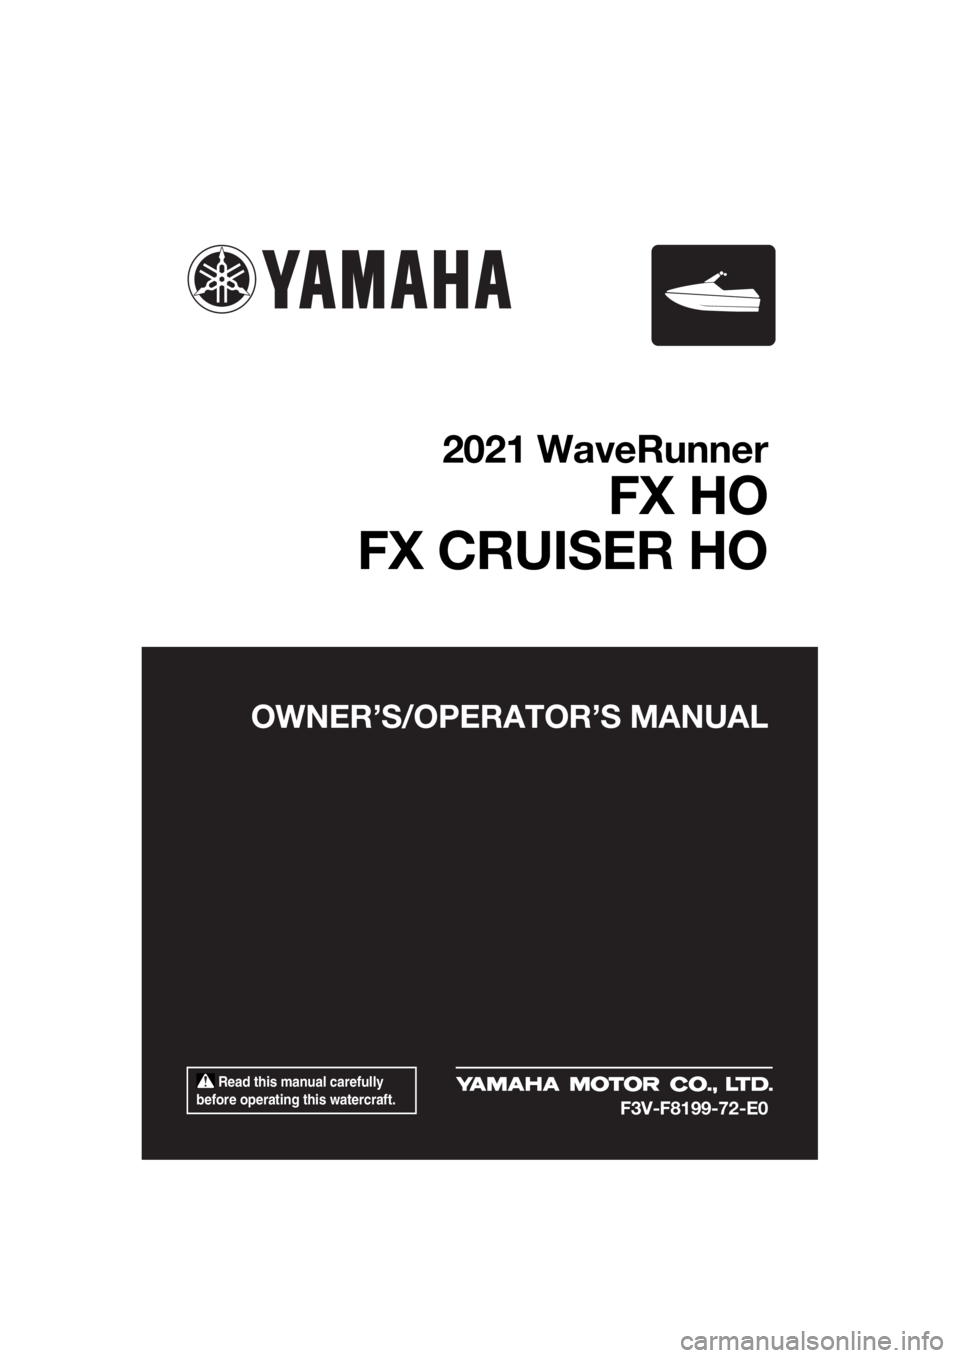 YAMAHA FX HO CRUISER 2021  Owners Manual  Read this manual carefully 
before operating this watercraft.
OWNER’S/OPERAT OR’S MANUAL
2021 WaveRunner
FX HO
FX CRUISER HO
F3V-F8199-72-E0
UF3V72E0.book  Page 1  Tuesday, June 16, 2020  2:29 PM